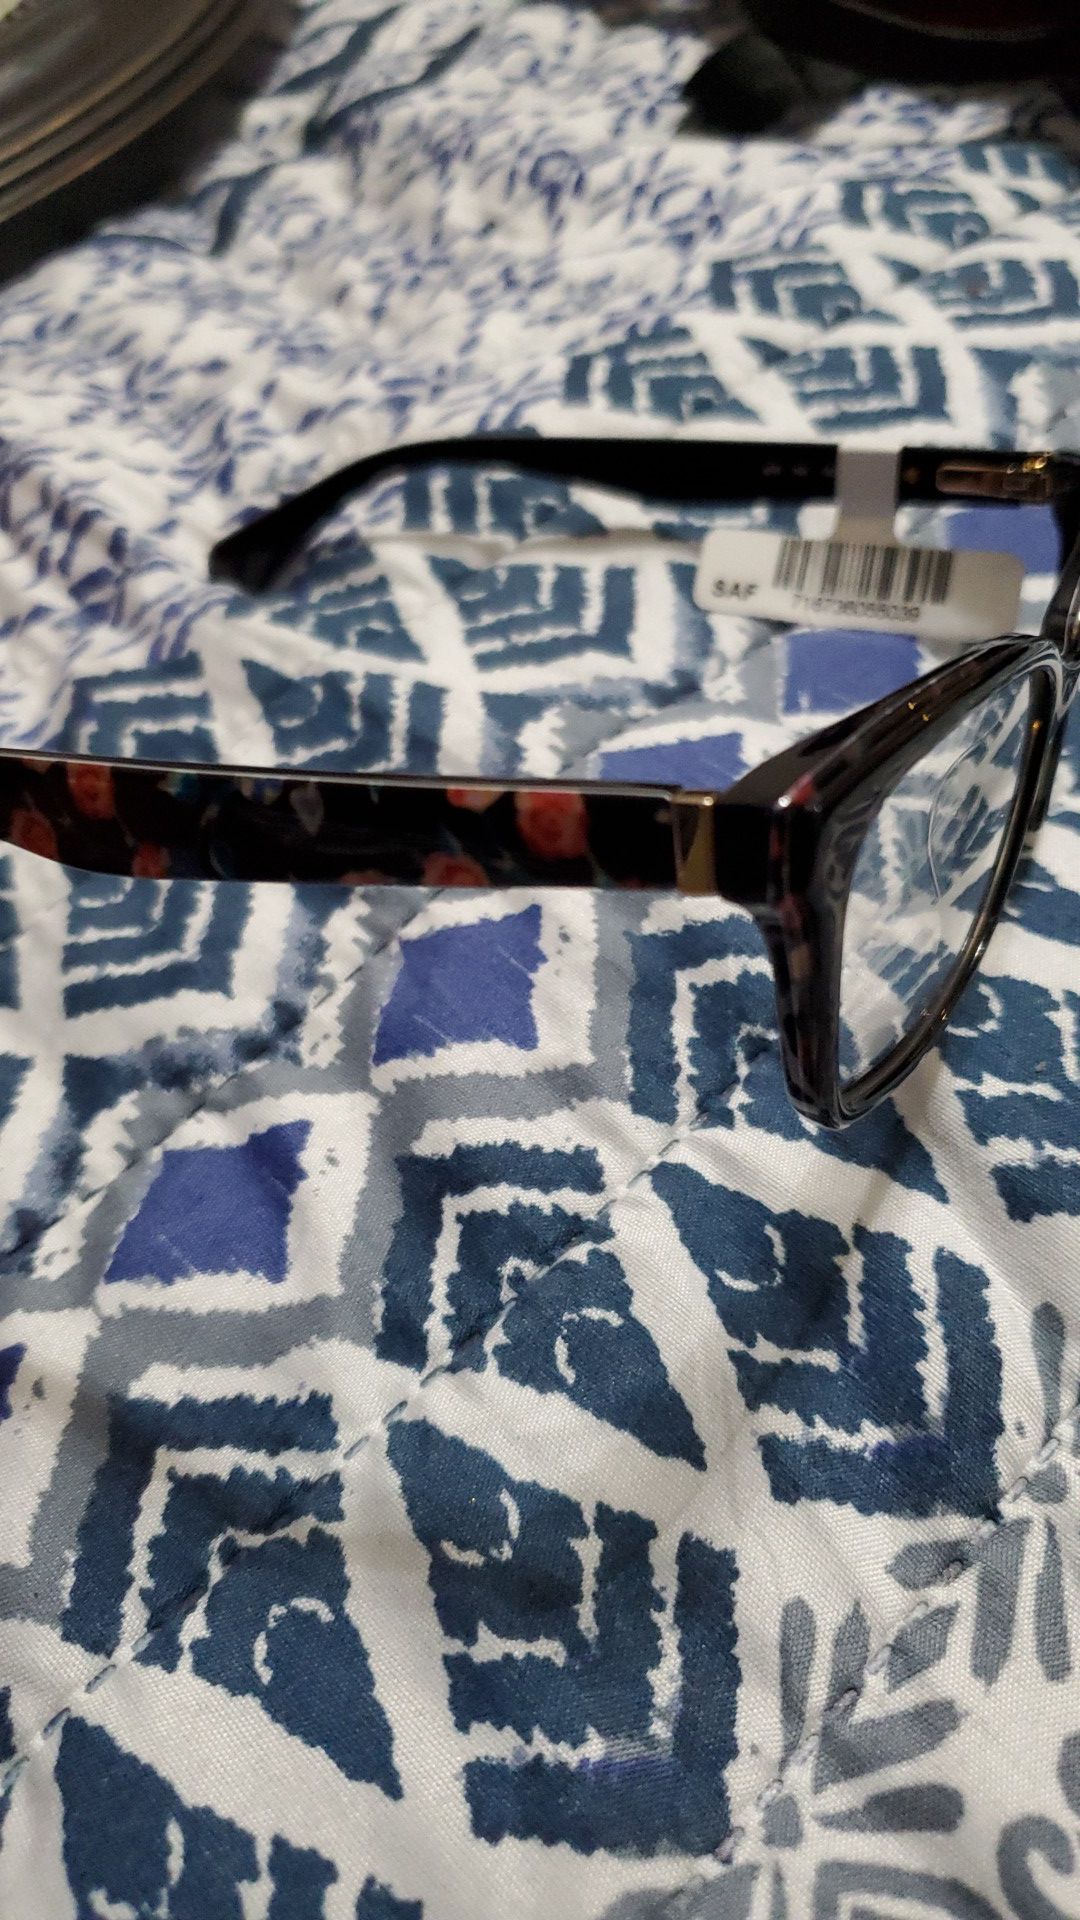 Brand new Kate spade seeing glasses un prescripted